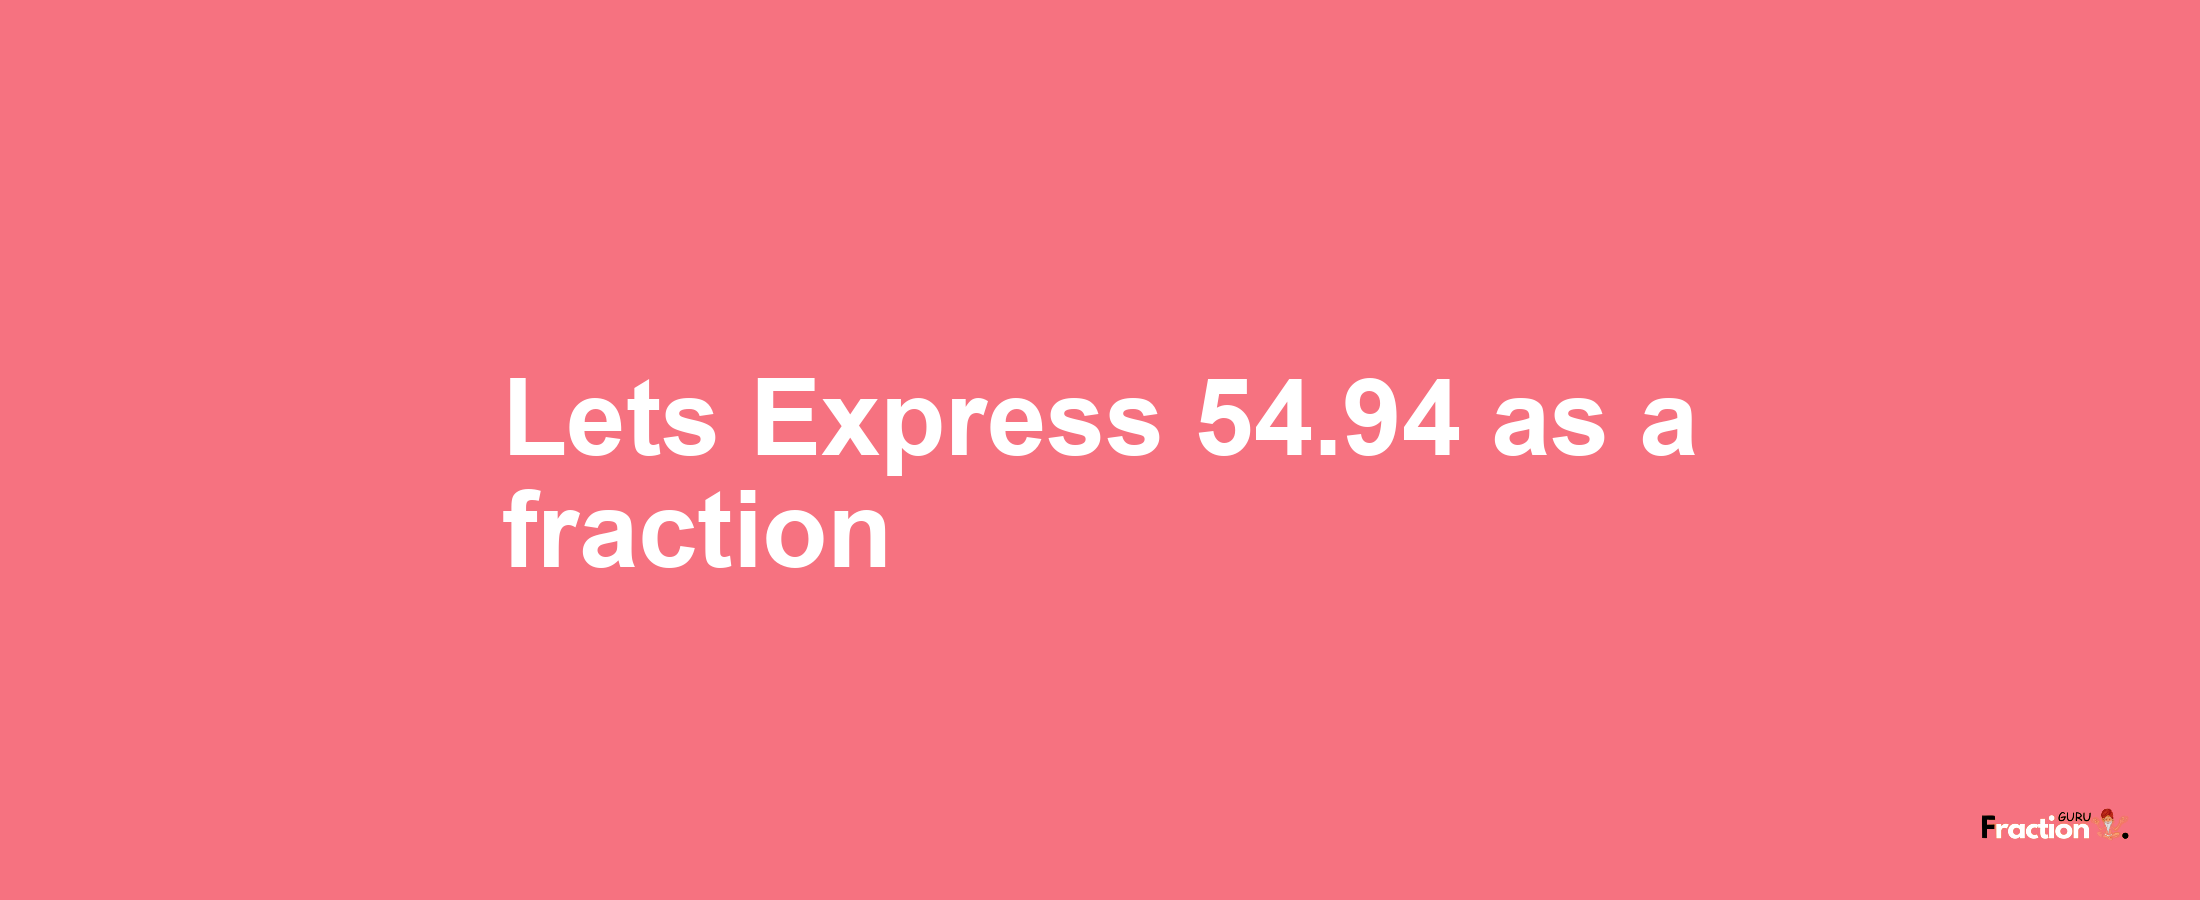 Lets Express 54.94 as afraction